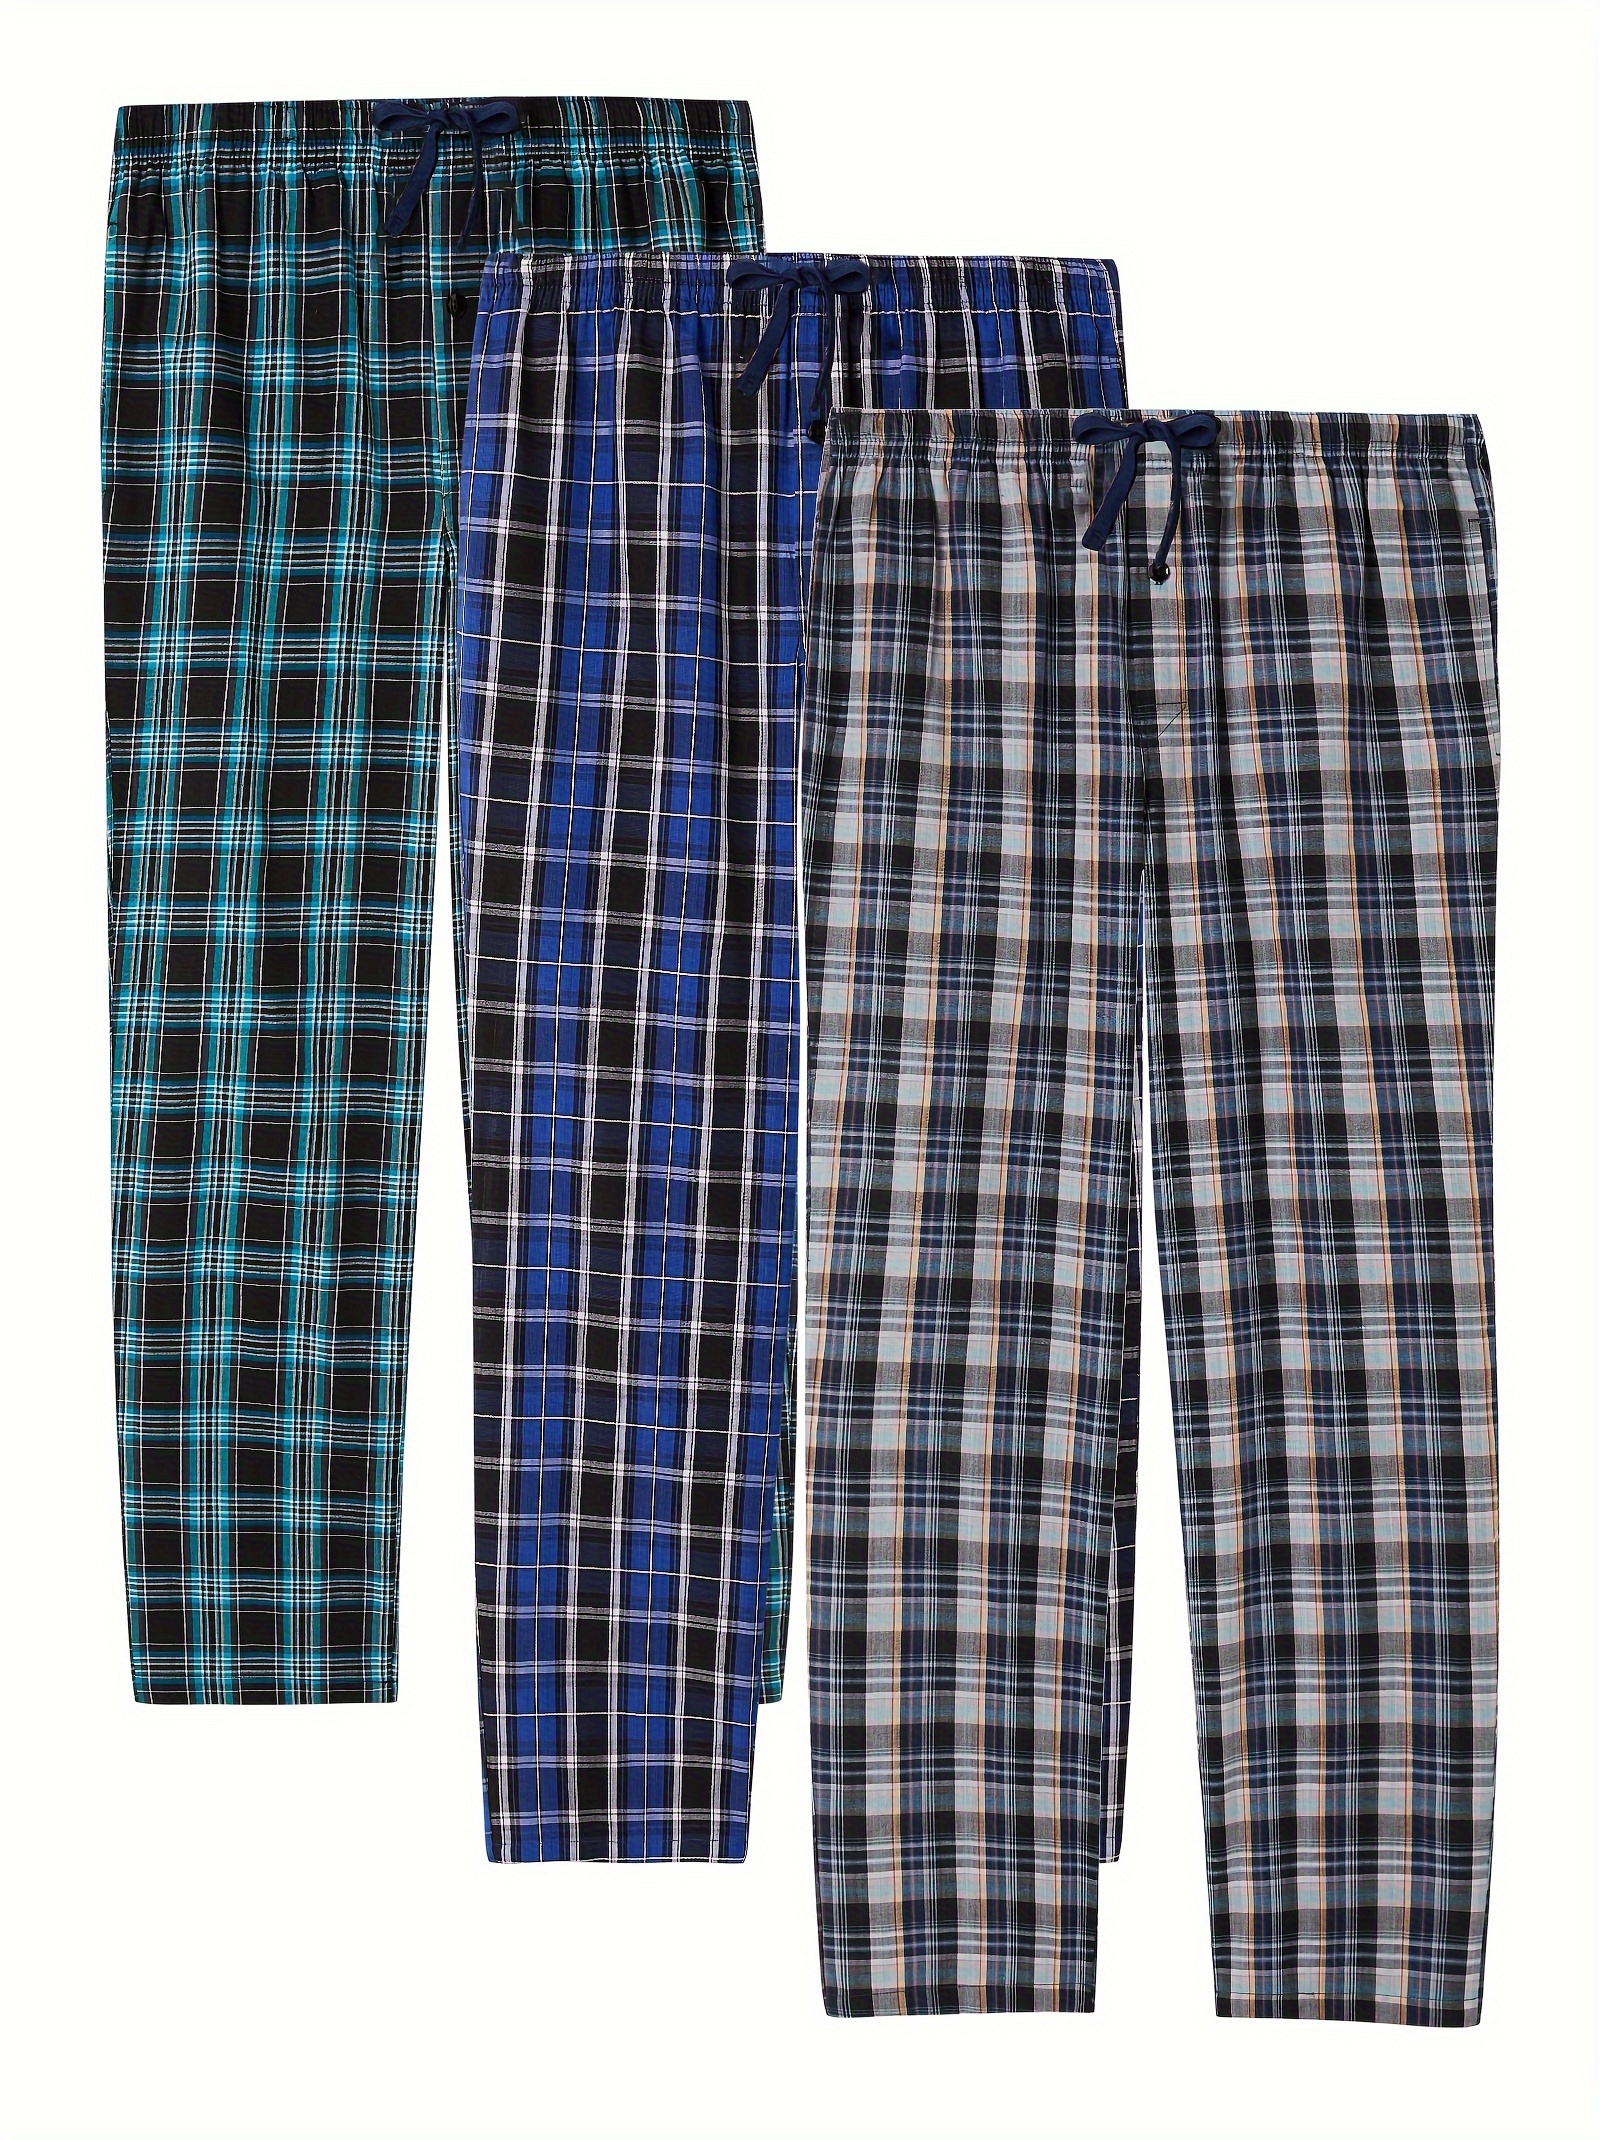 Black White Buffalo Plaid Pajama Pants for Men PJ Bottoms with Pockets  Cotton Sleep Pant Yoga Pants for Workout at  Men's Clothing store